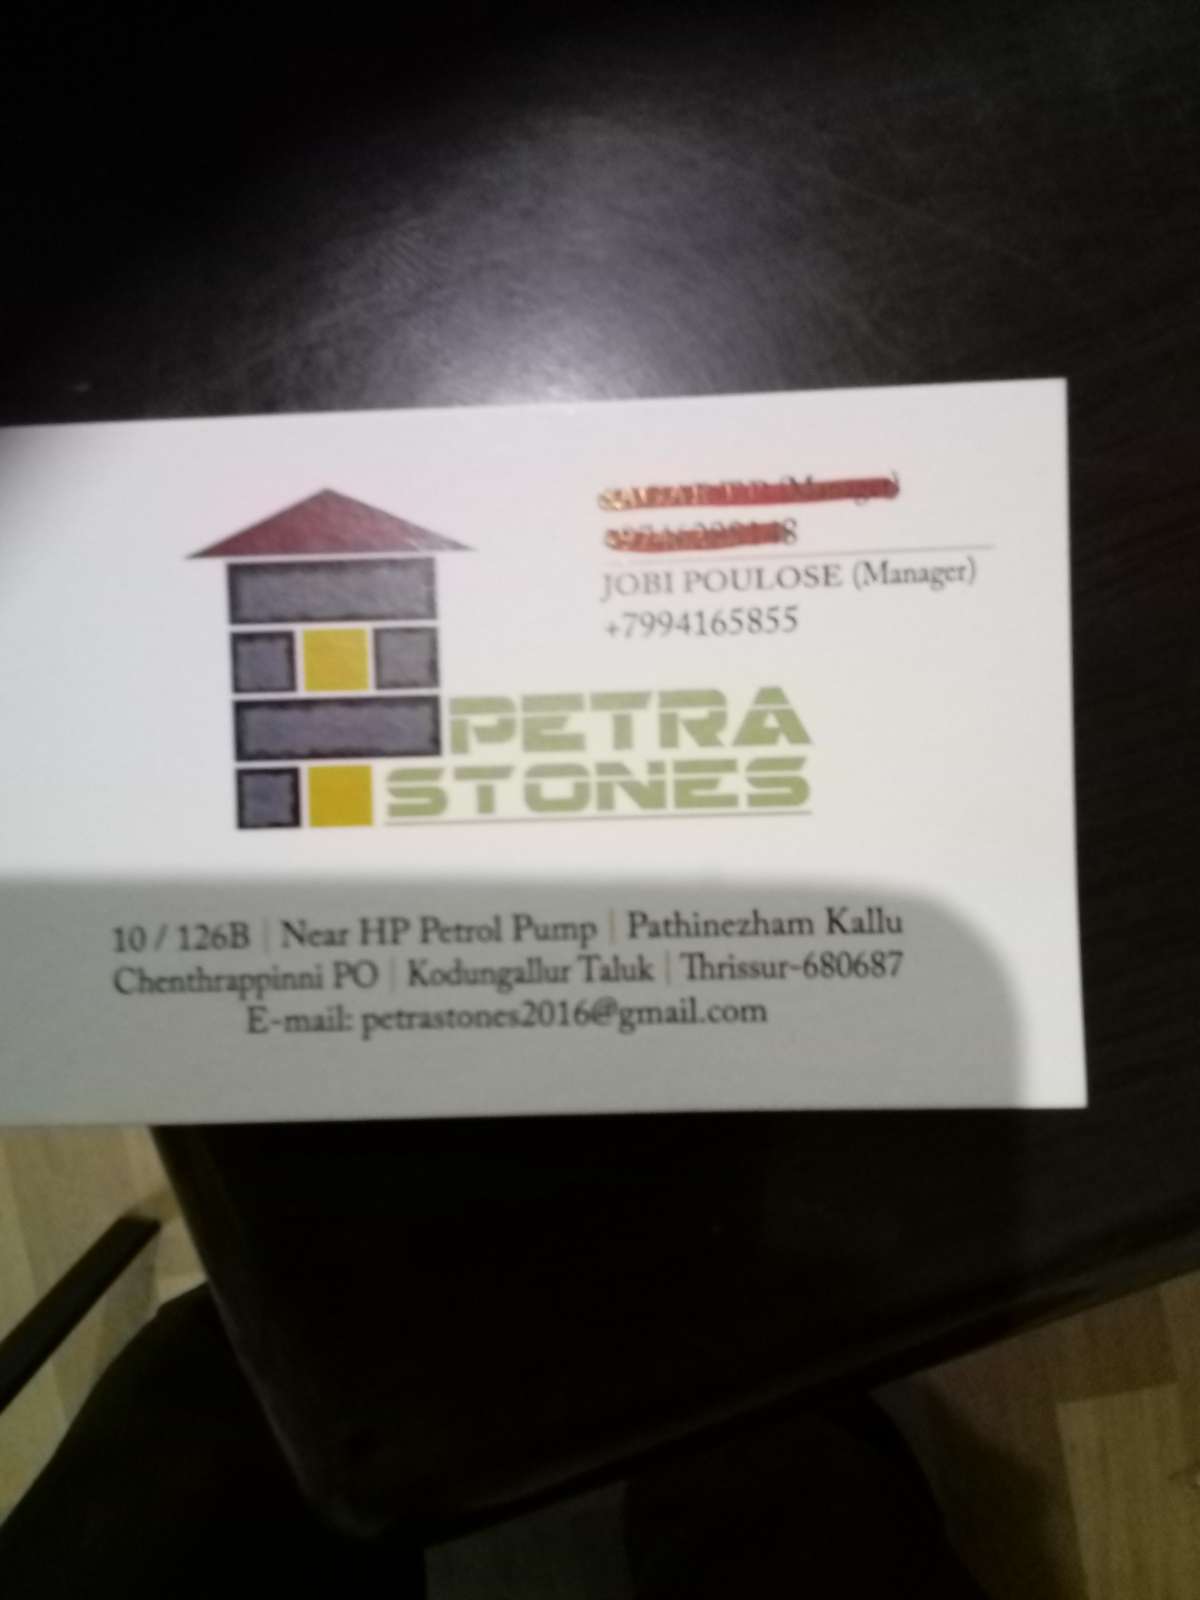 We are PETRA STONES dealing in all types of Natural stone wall cladding, wall panels, Stone mosaic, Garden stones, Paving/Laying stones, Pebbles, Stone Veneers, Natural & artificial grass etc. 

We had clients from all over Kerala & Other states
Poonam Grihnirman Pvt.Ltd., MUMBAI
Green Cabana Wayanad
PEC builders & contractors Kollam
Public Work Contractors Thumba, Thiruvananthapuram
Rubber Products Factory, Kottayam
Pentagon Architect, Guruvayoor
Kaushikam Builders Pvt. Ltd., Kodungallur etc. 
are some of our clients.

We are ready to serve you as a trustworthy in all your Stones and landscape works
